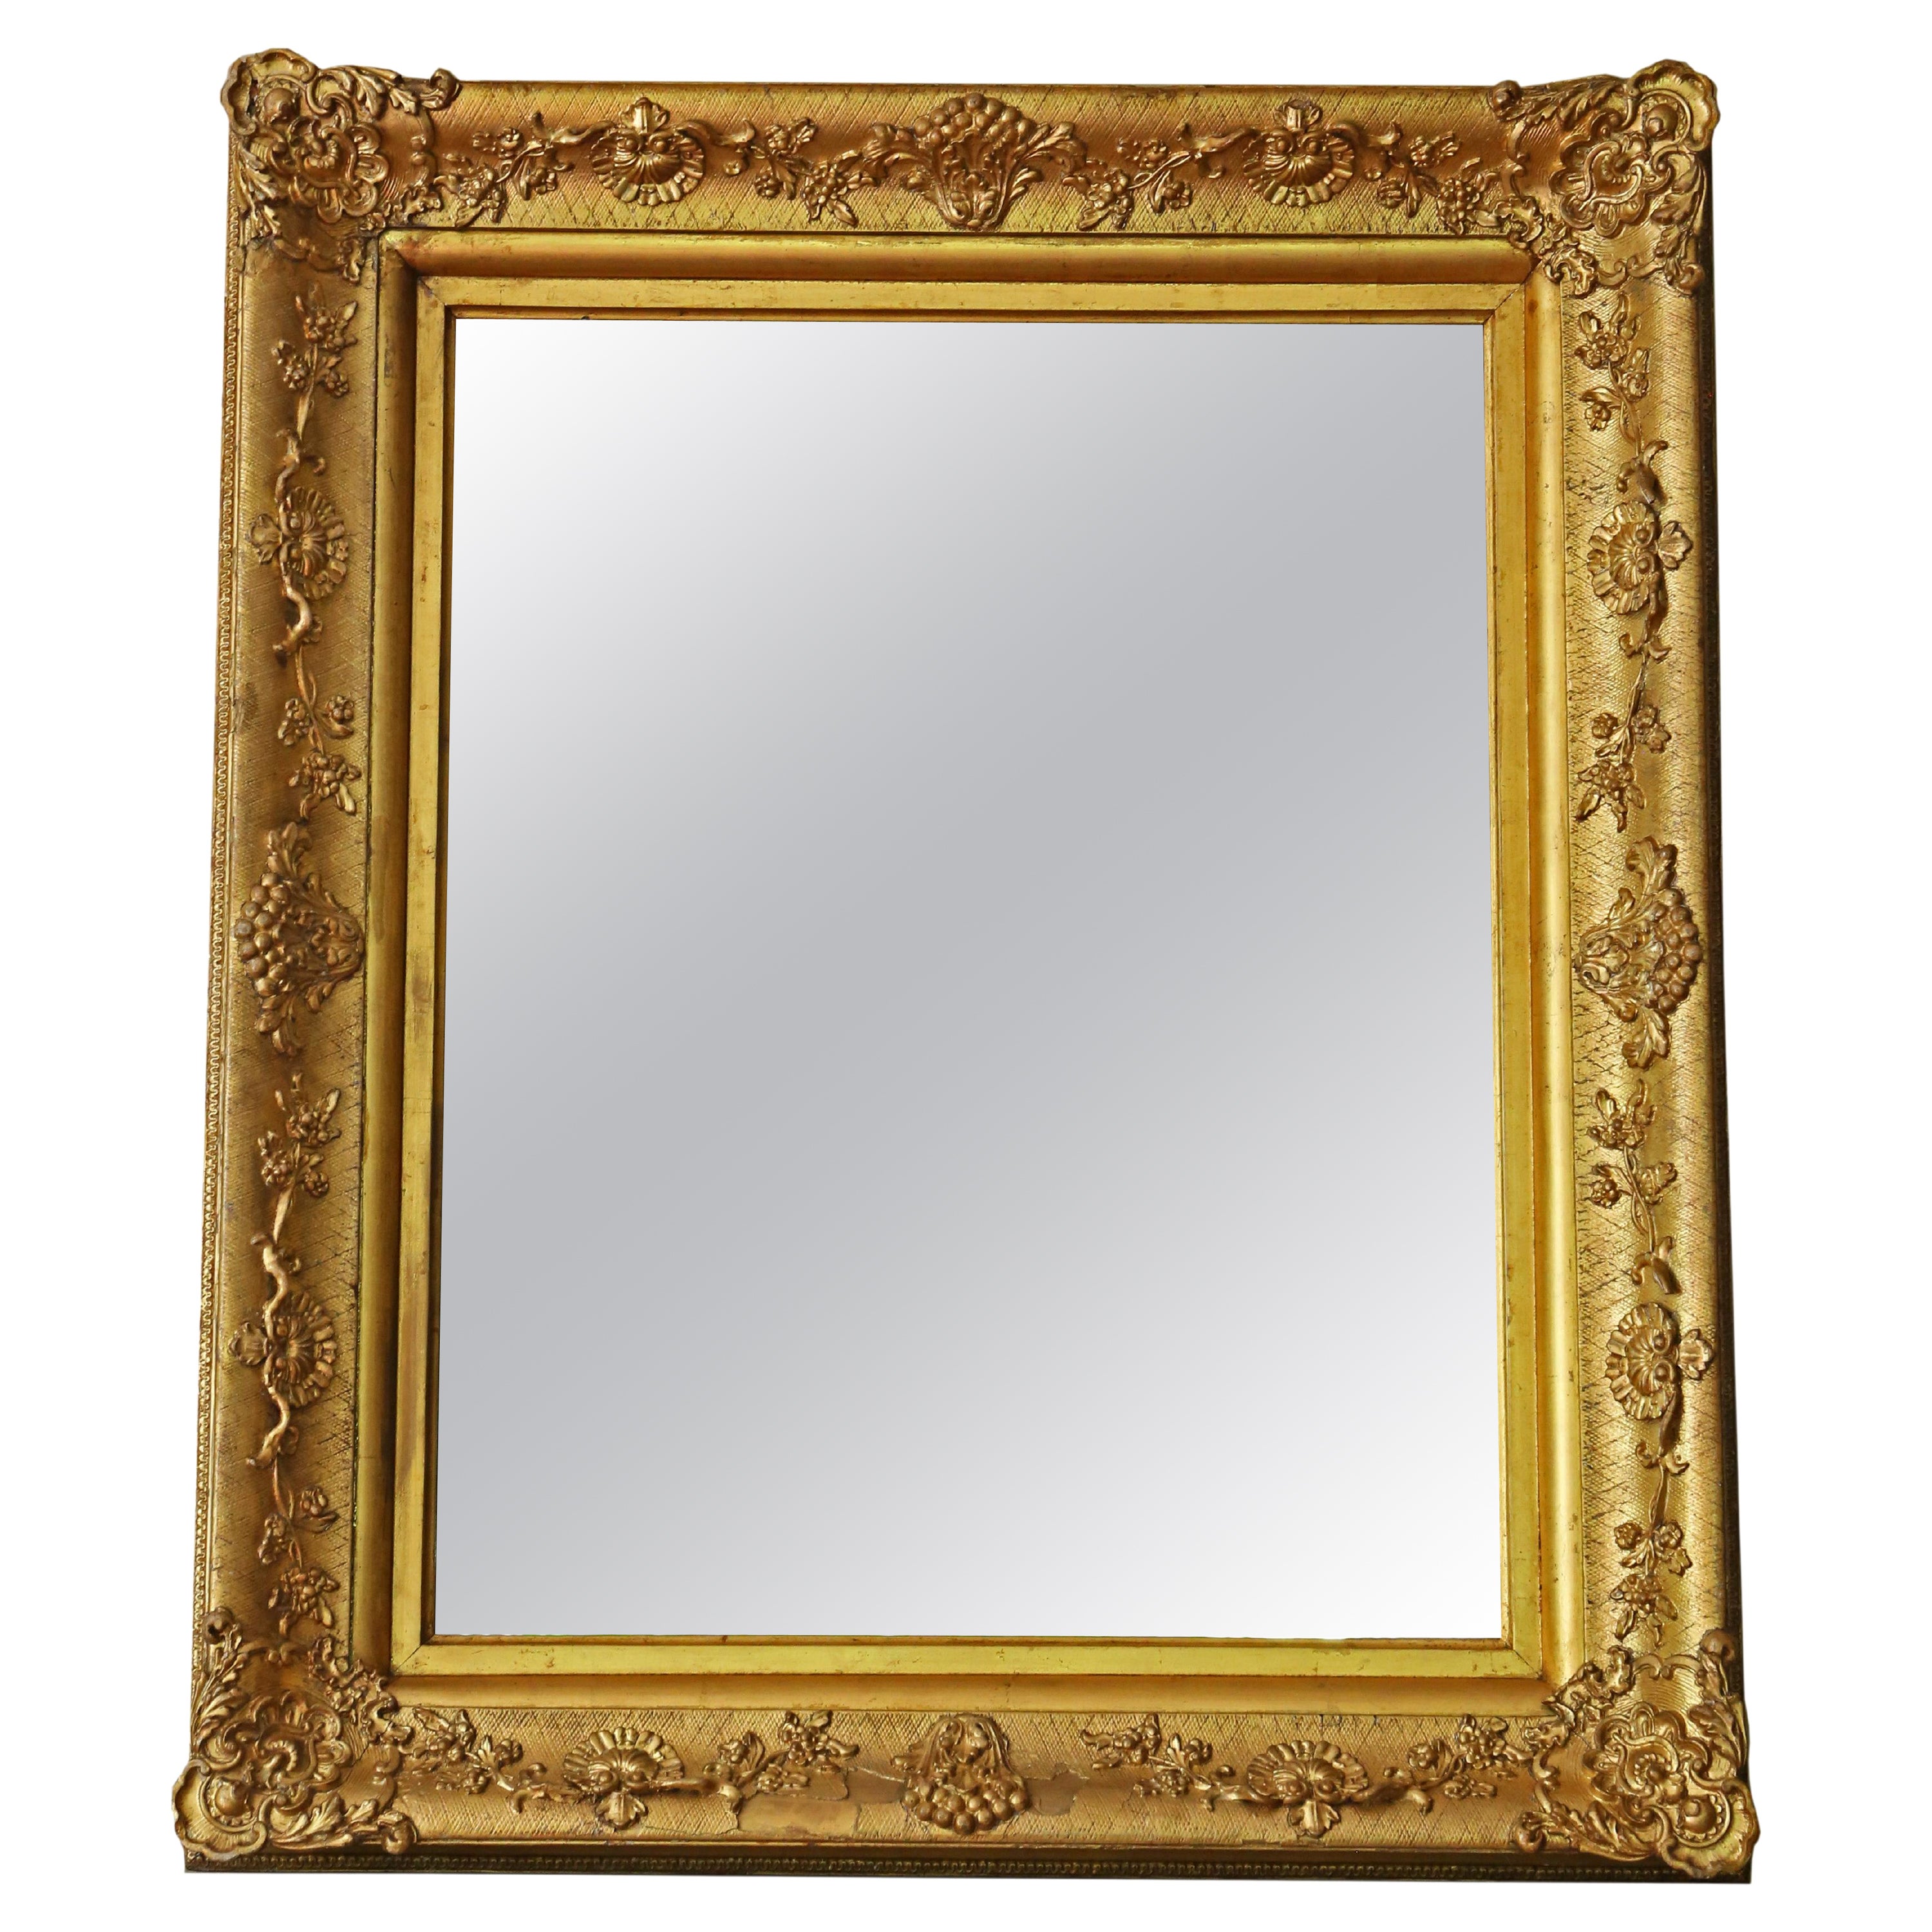  Antique fine quality large gilt overmantle wall mirror 19th Century